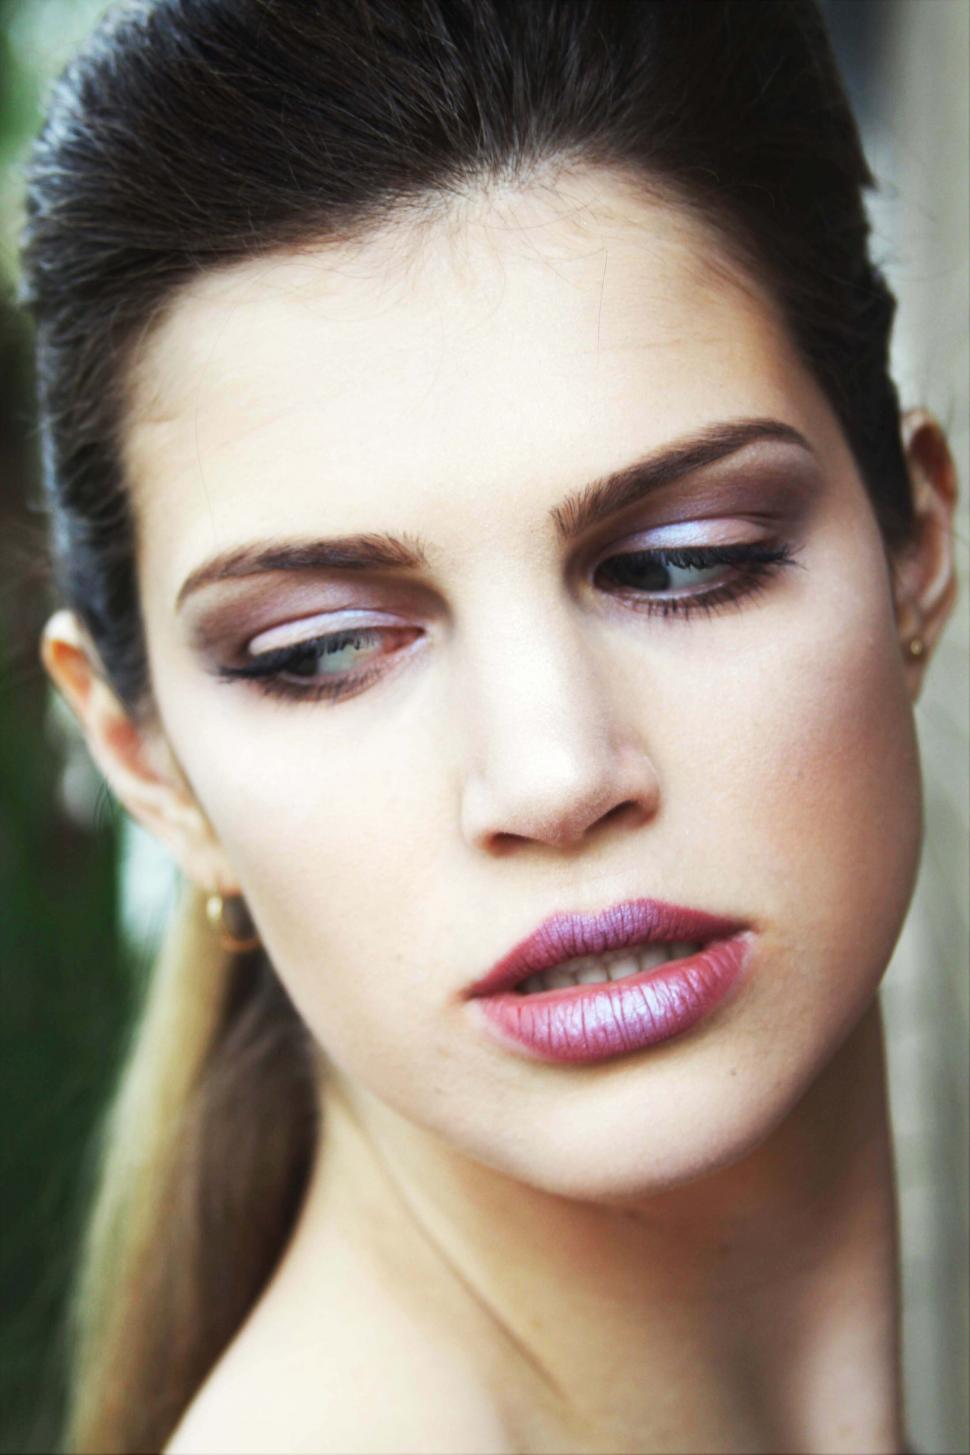 Free Image of Close-up of woman s face with makeup 